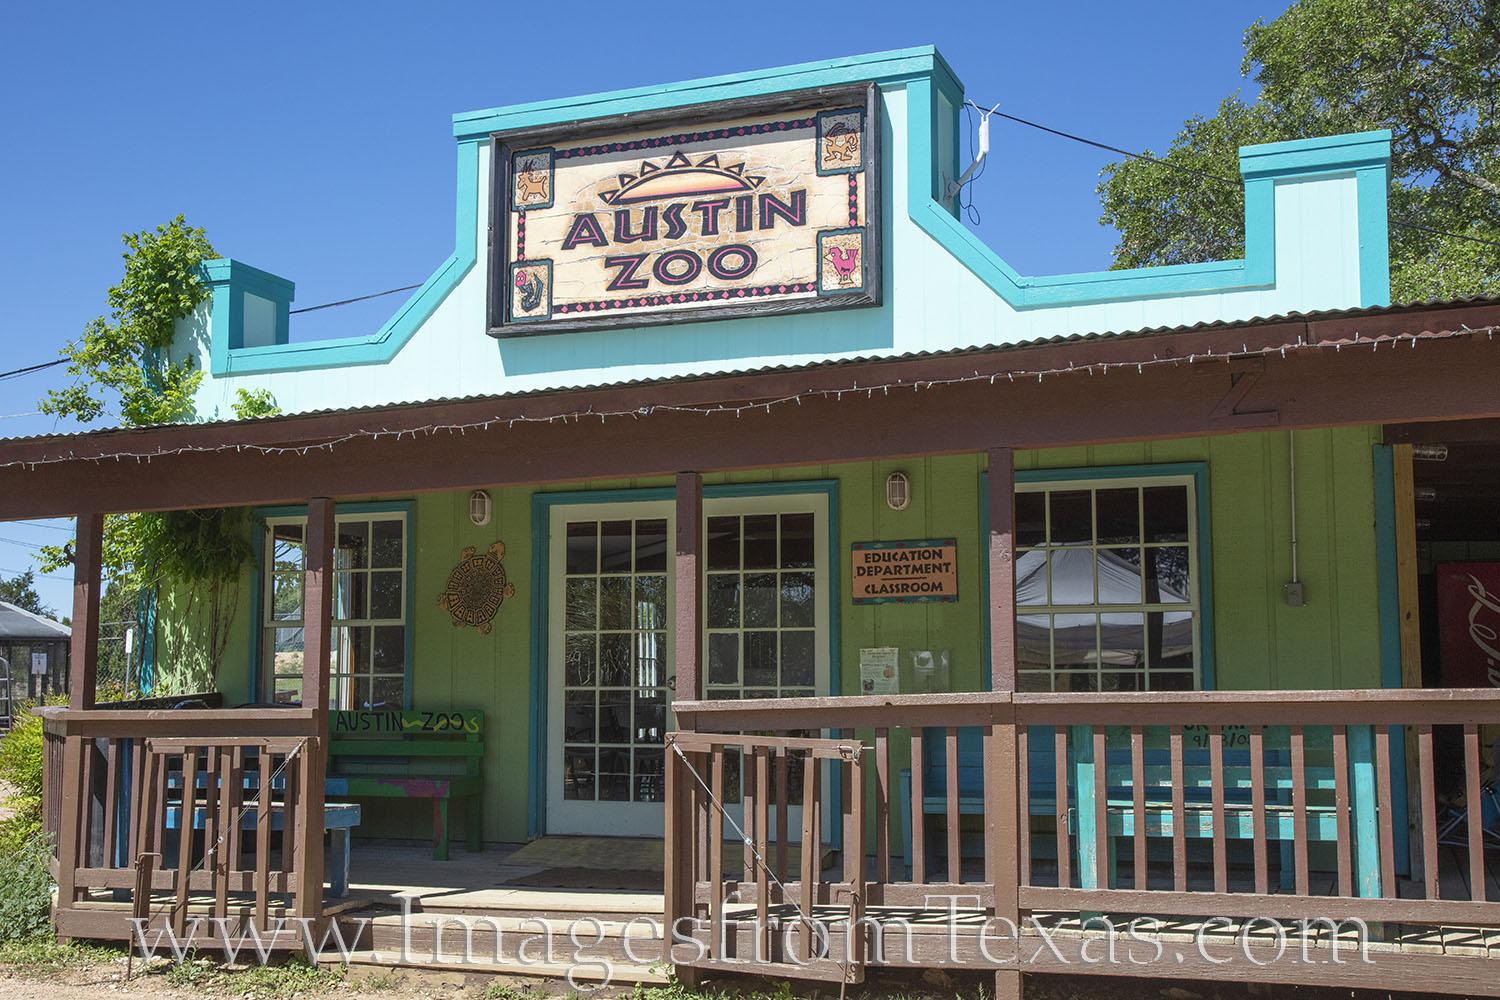 The Austin Zoo opened in 1990 and houses over 300 rescued animals. The zoo opened in 1990 as the Good Day Ranch, housing mostly...